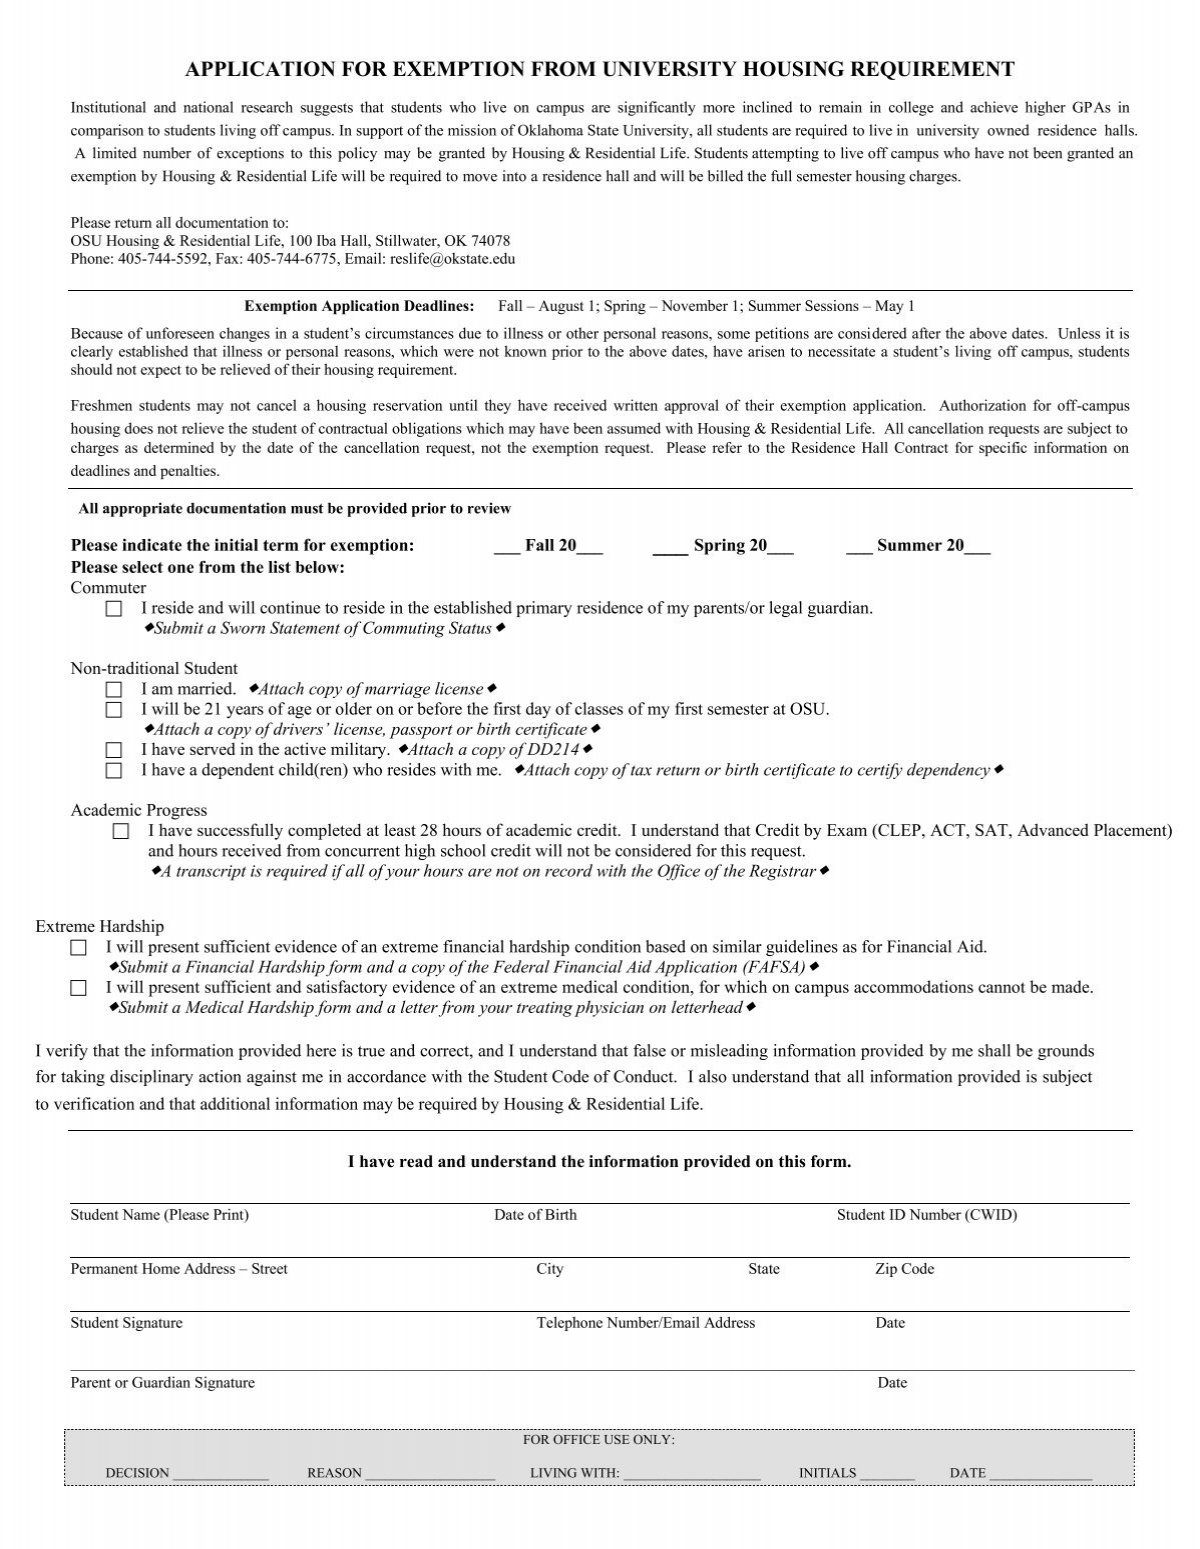 application-for-exemption-from-university-housing-requirement-osu